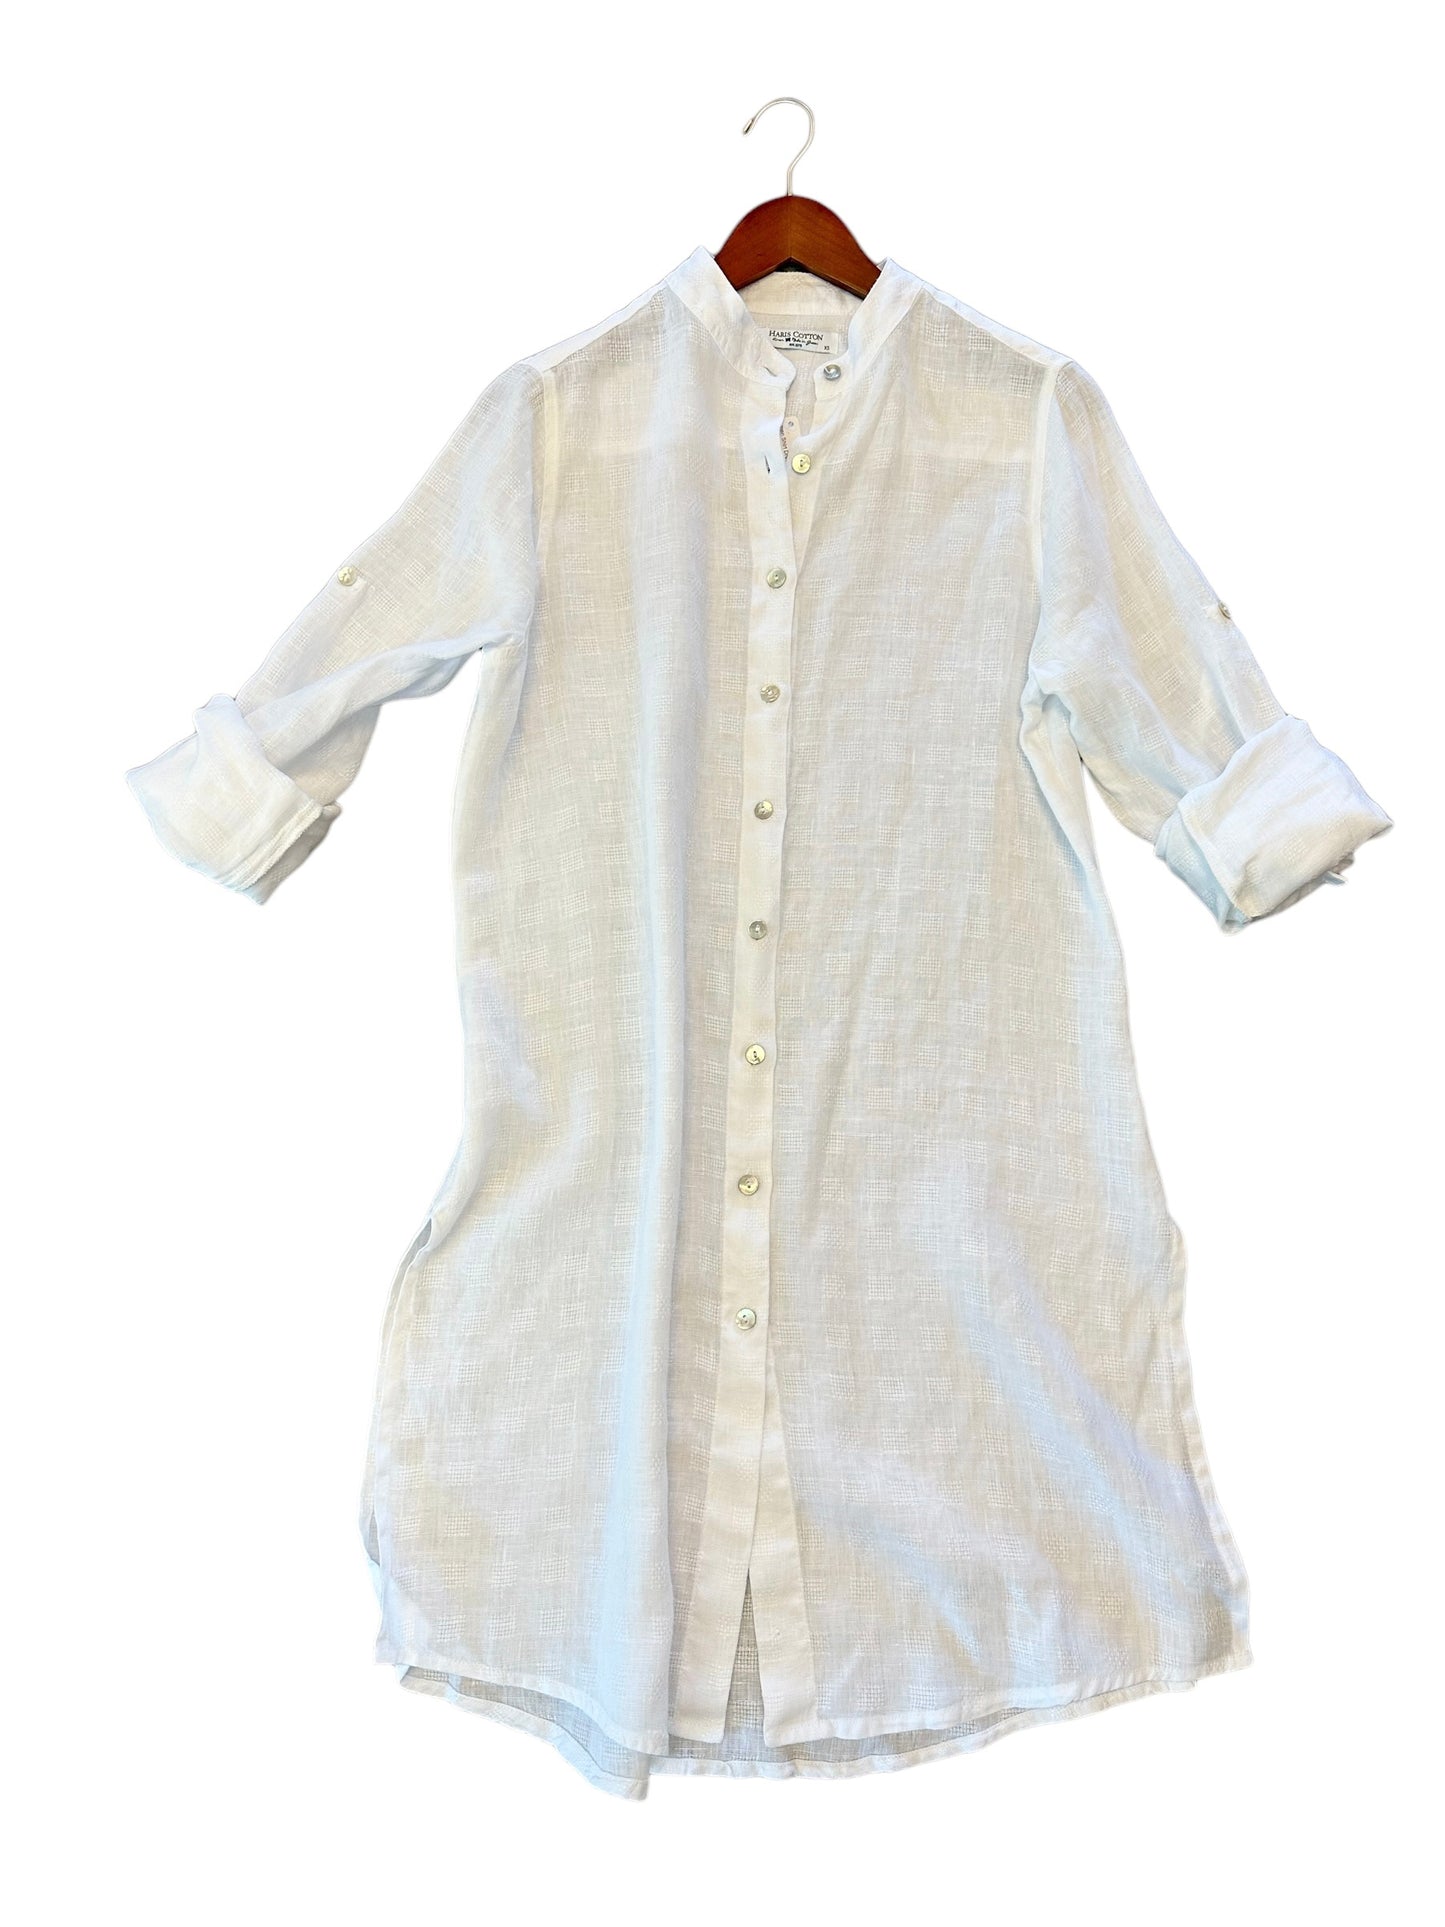 Linen Shirt Dress in white by Haris Cotton